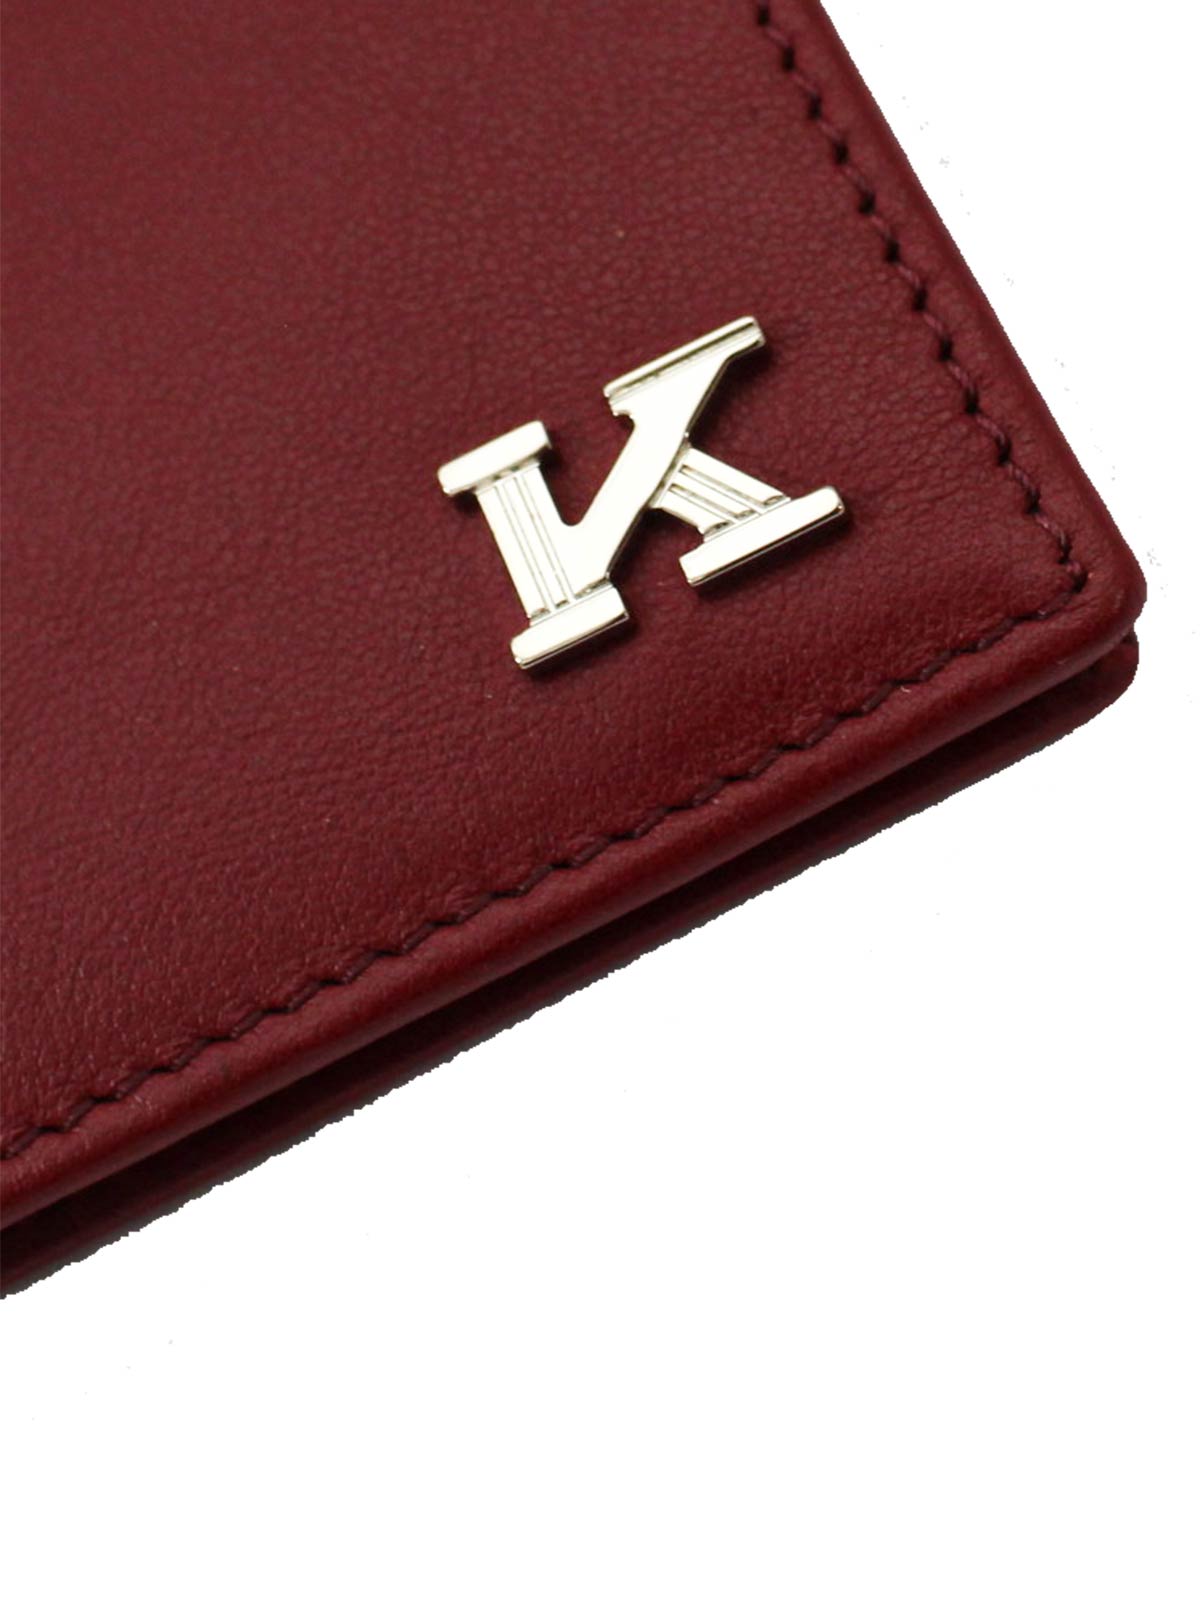 Louis Vuitton Card Holders products for sale